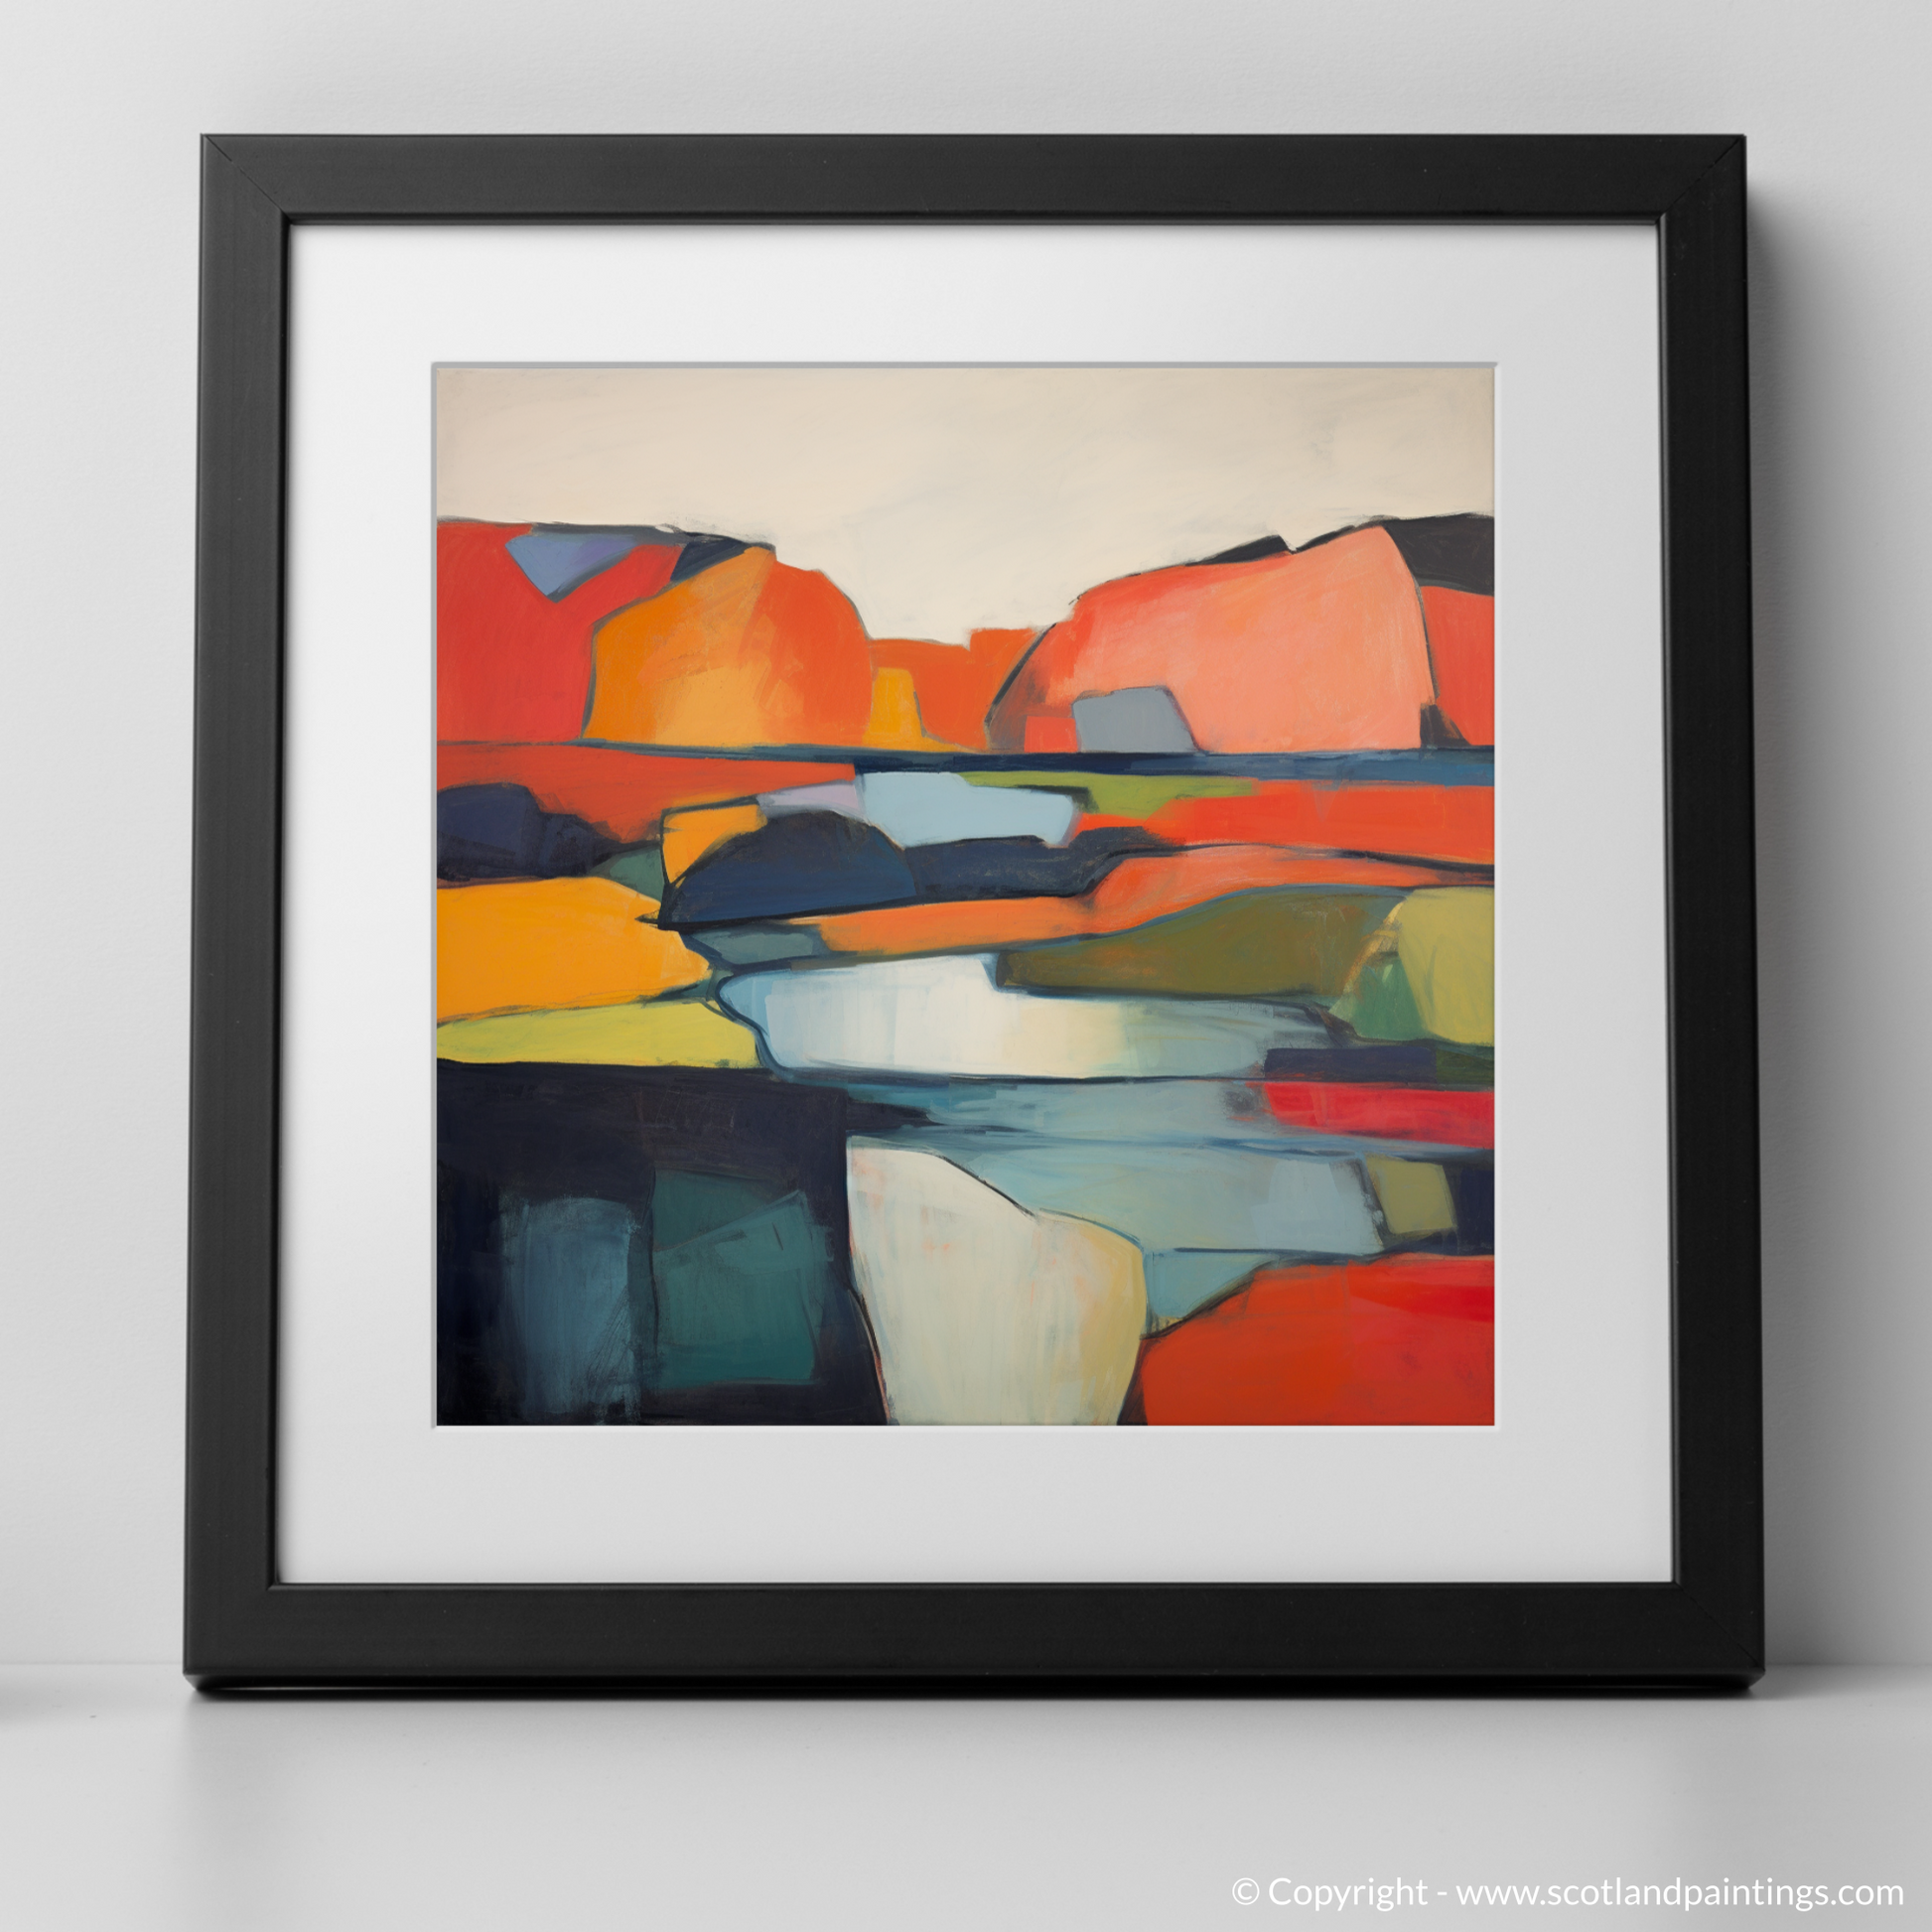 Art Print of A loch in Scotland with a black frame